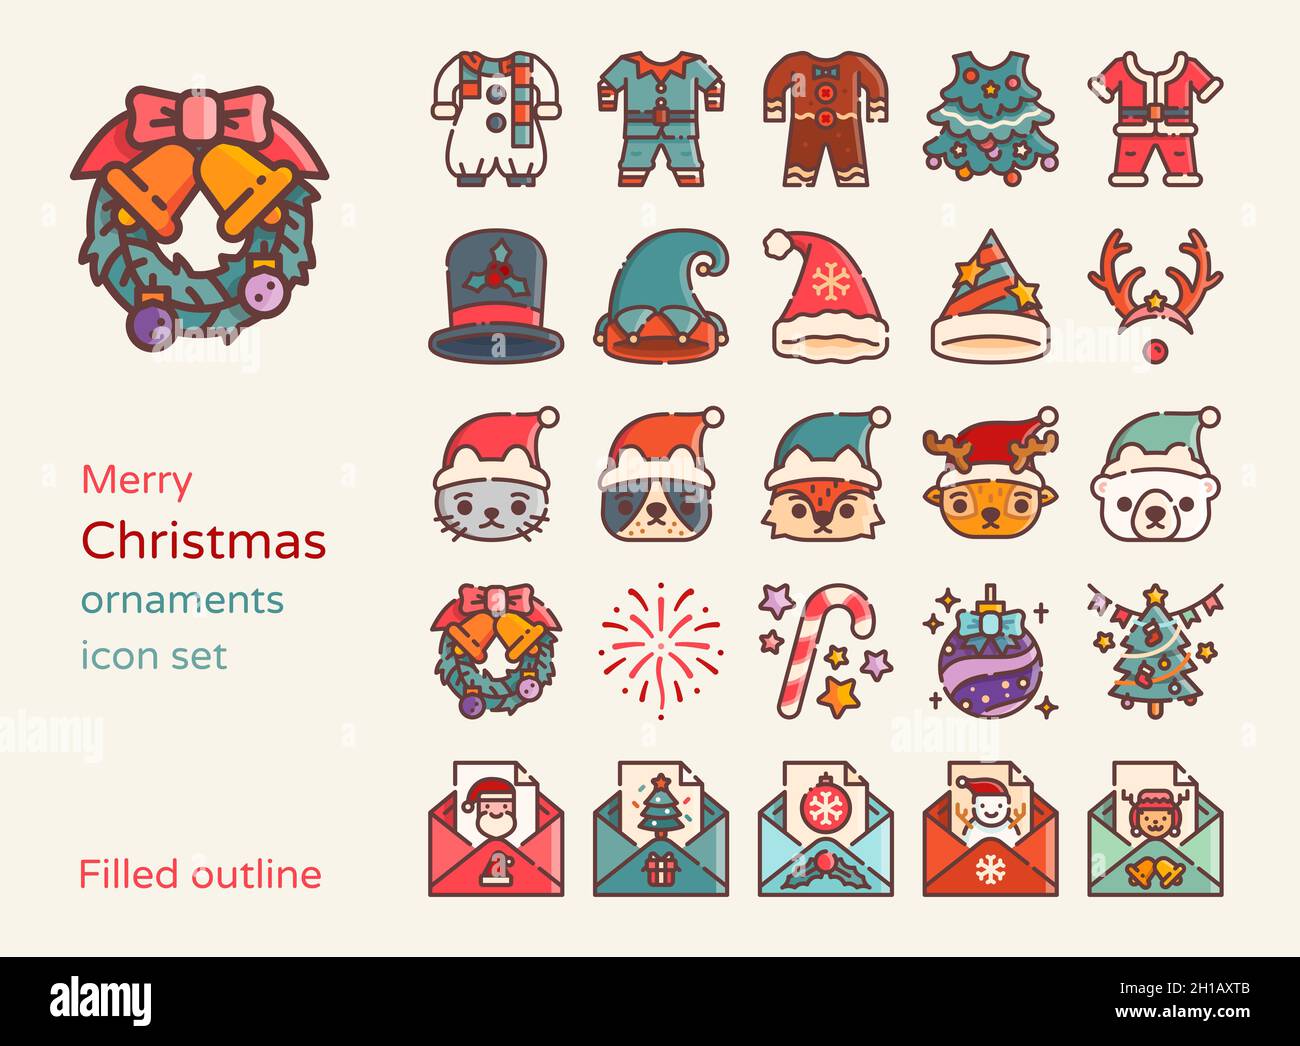 Christmas ornaments and element icon set. Filled outline detailed style Stock Vector